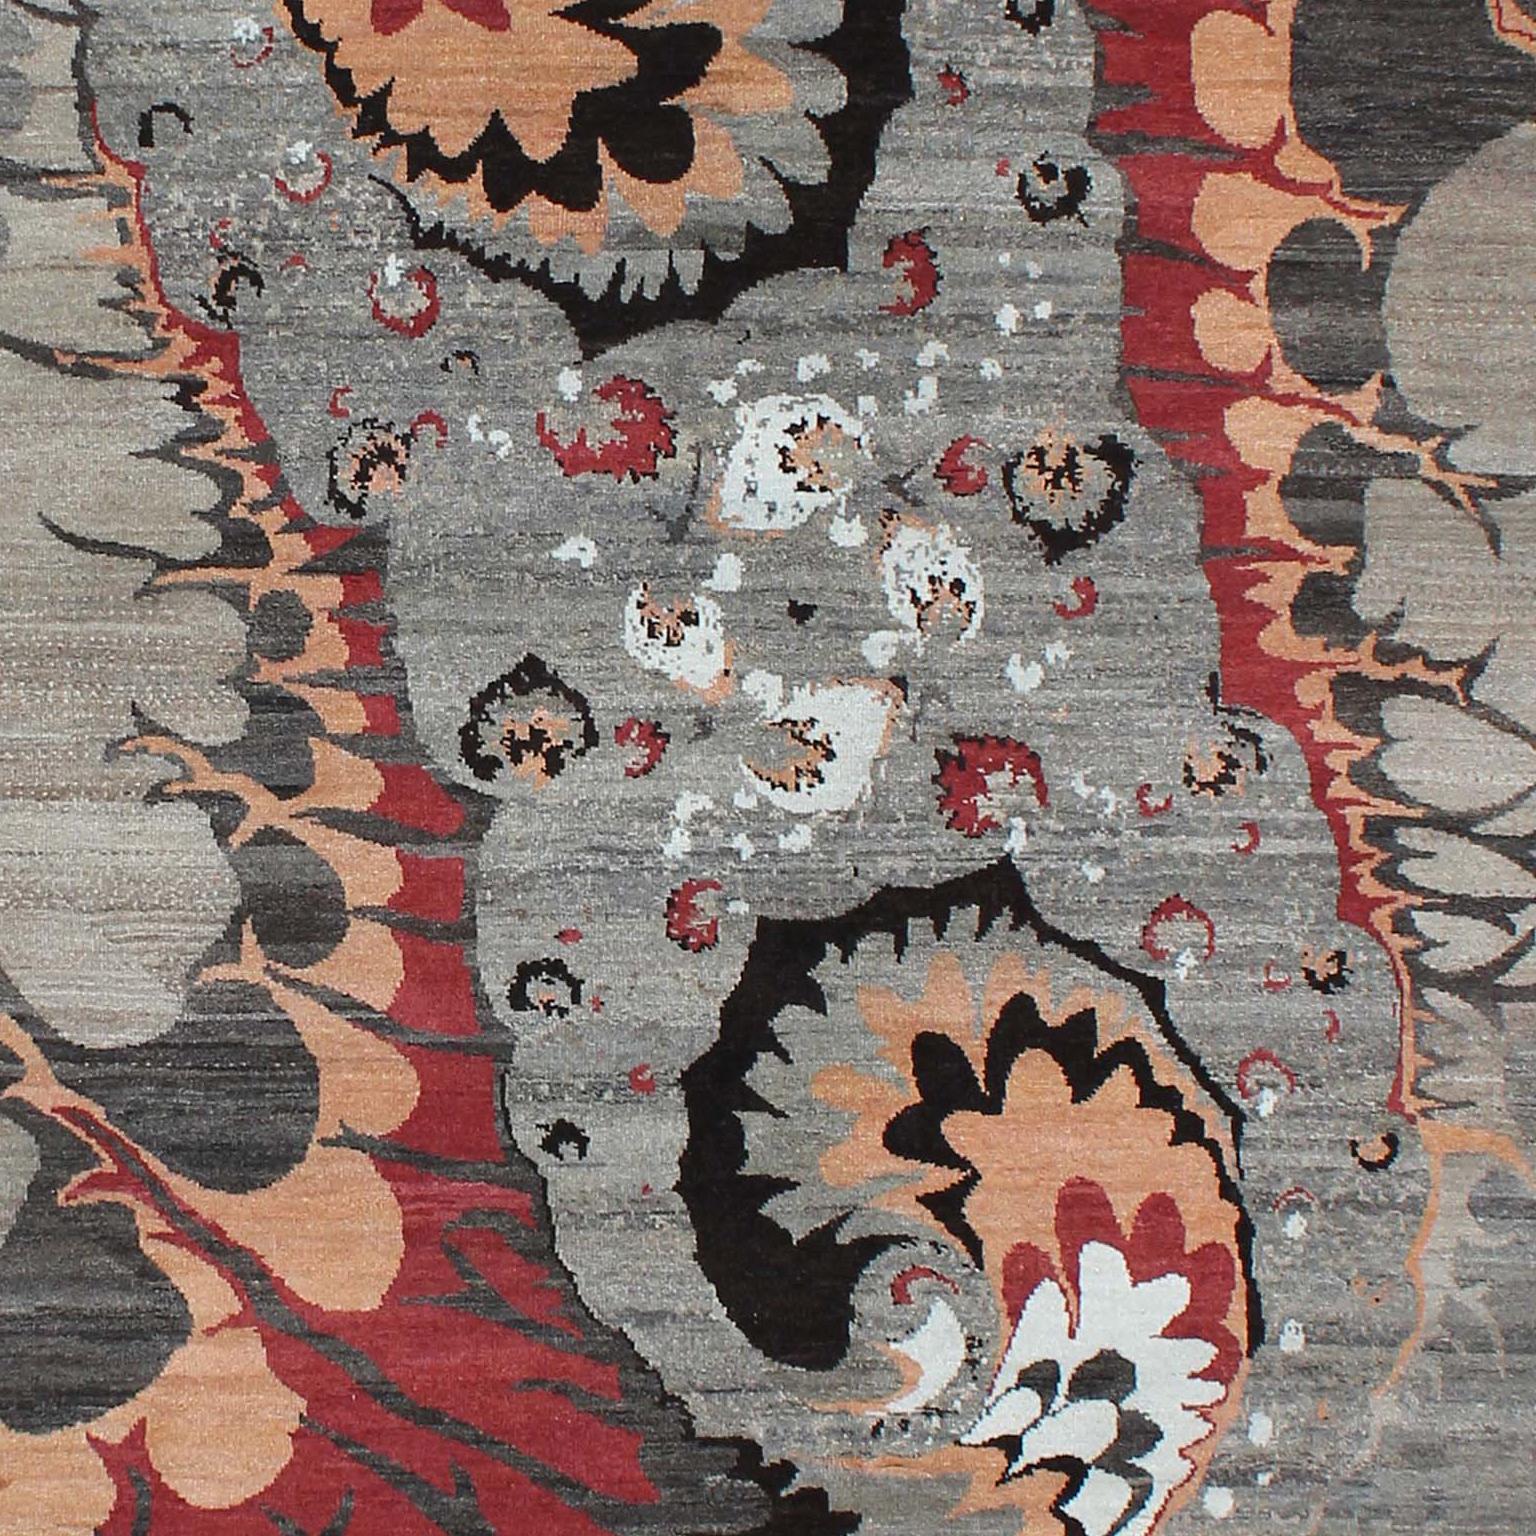 This Orley Shabahang signature “Synergy” carpet in pure handspun wool and organic dyes showcases a contemporary design in a hand-knotted Persian weave. From the Orley Shabahang Galaxy series, this carpet depicts the similarity of the swirling power